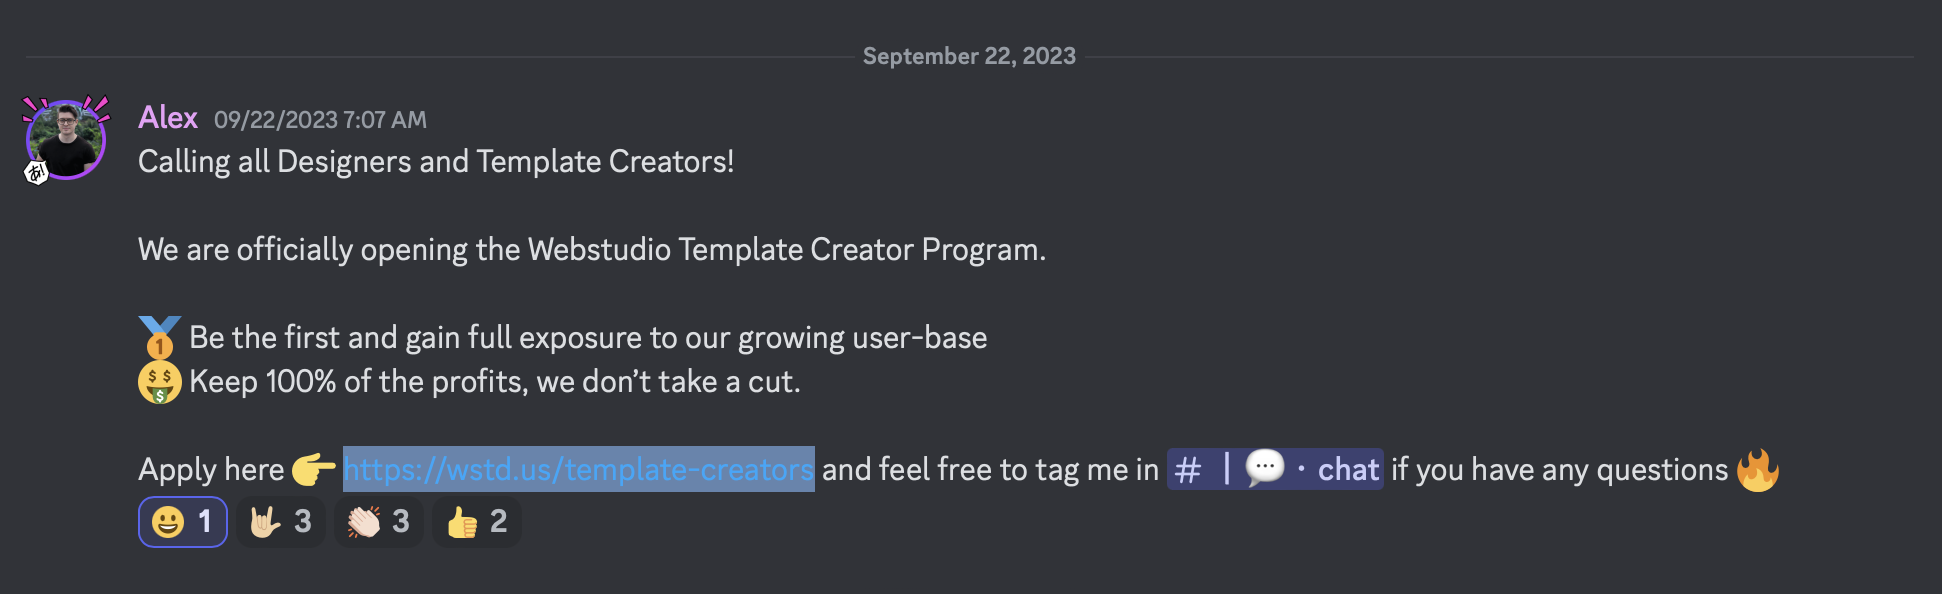 Discord message for new Template Creators